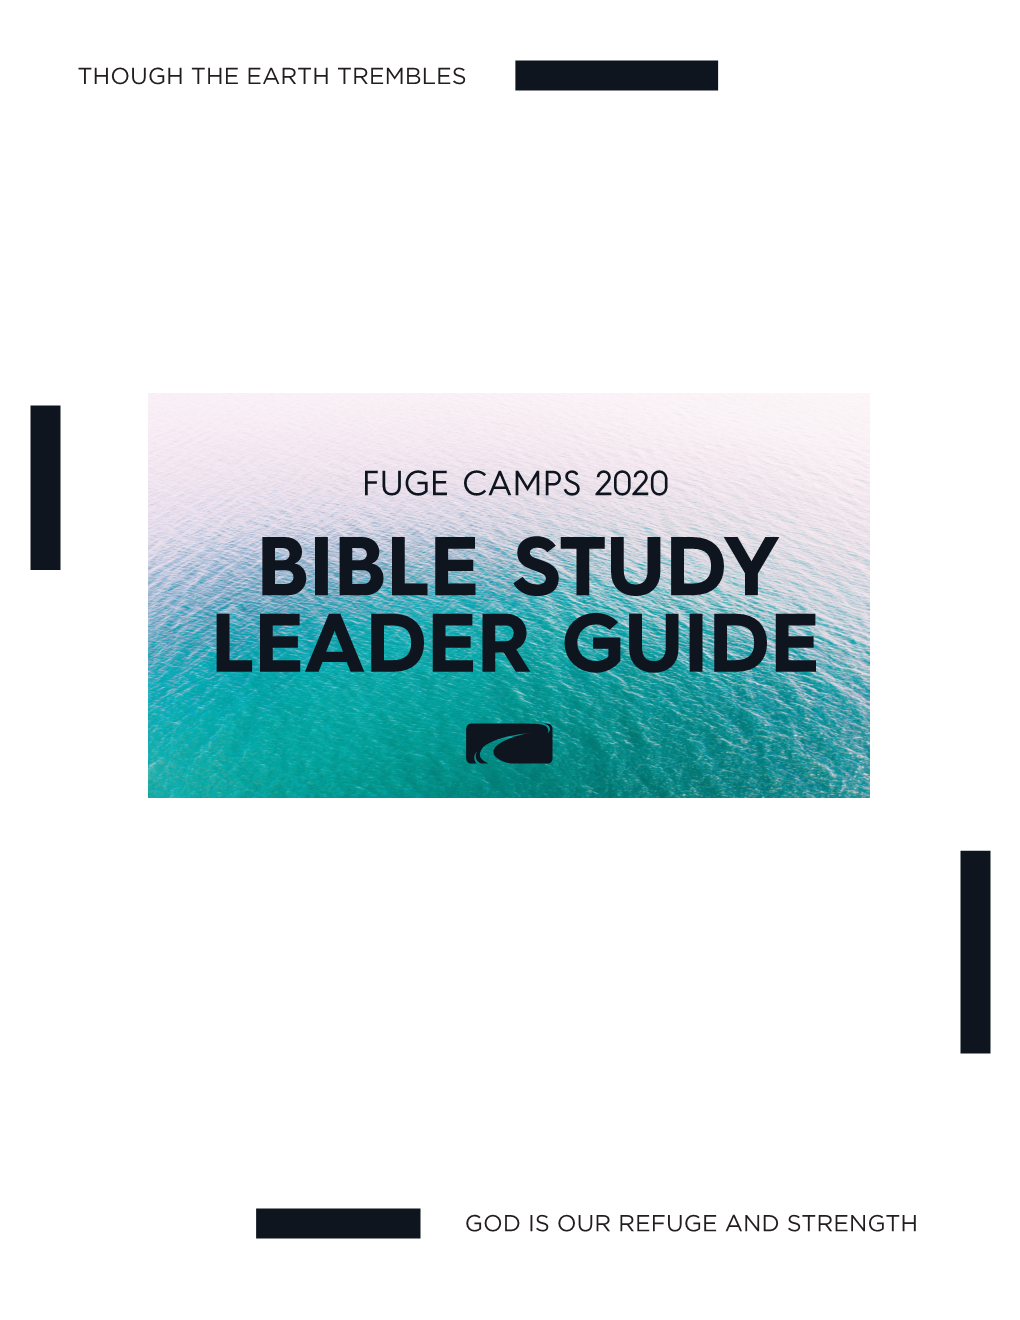 Bible Study Leader Guide